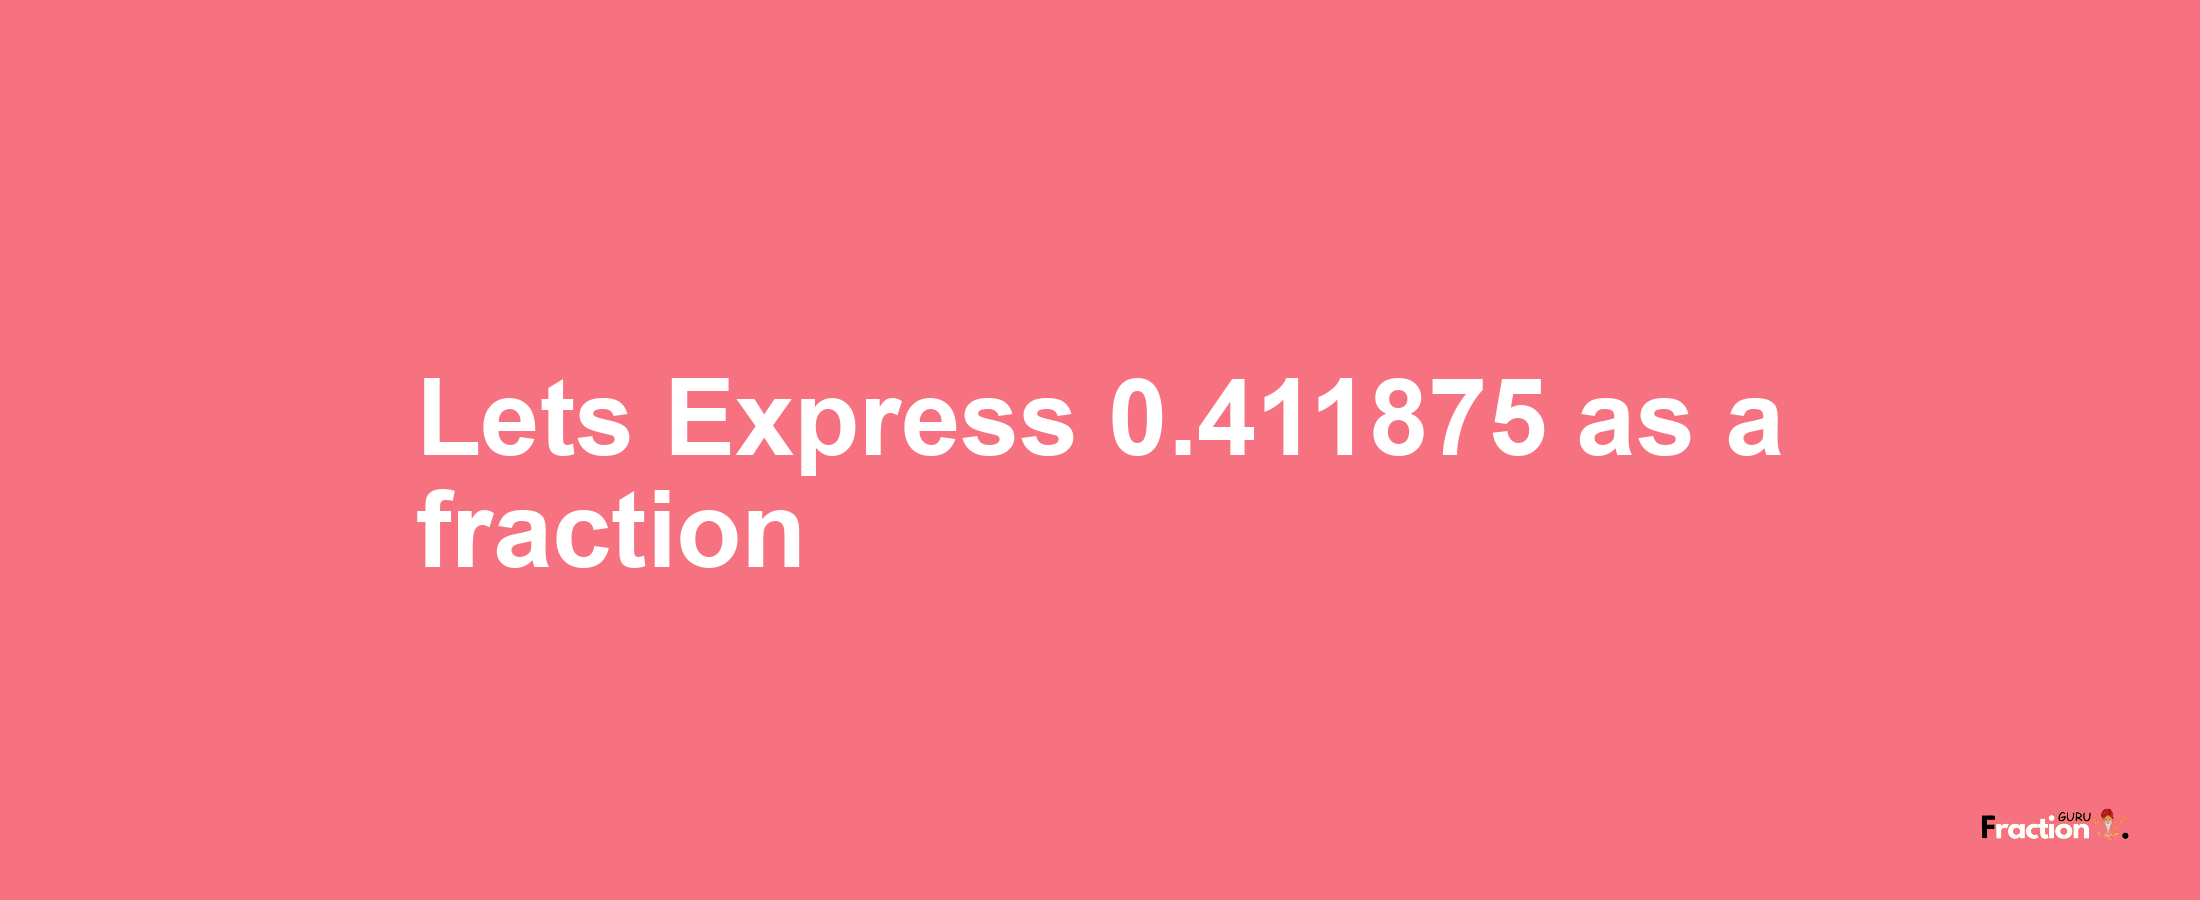 Lets Express 0.411875 as afraction